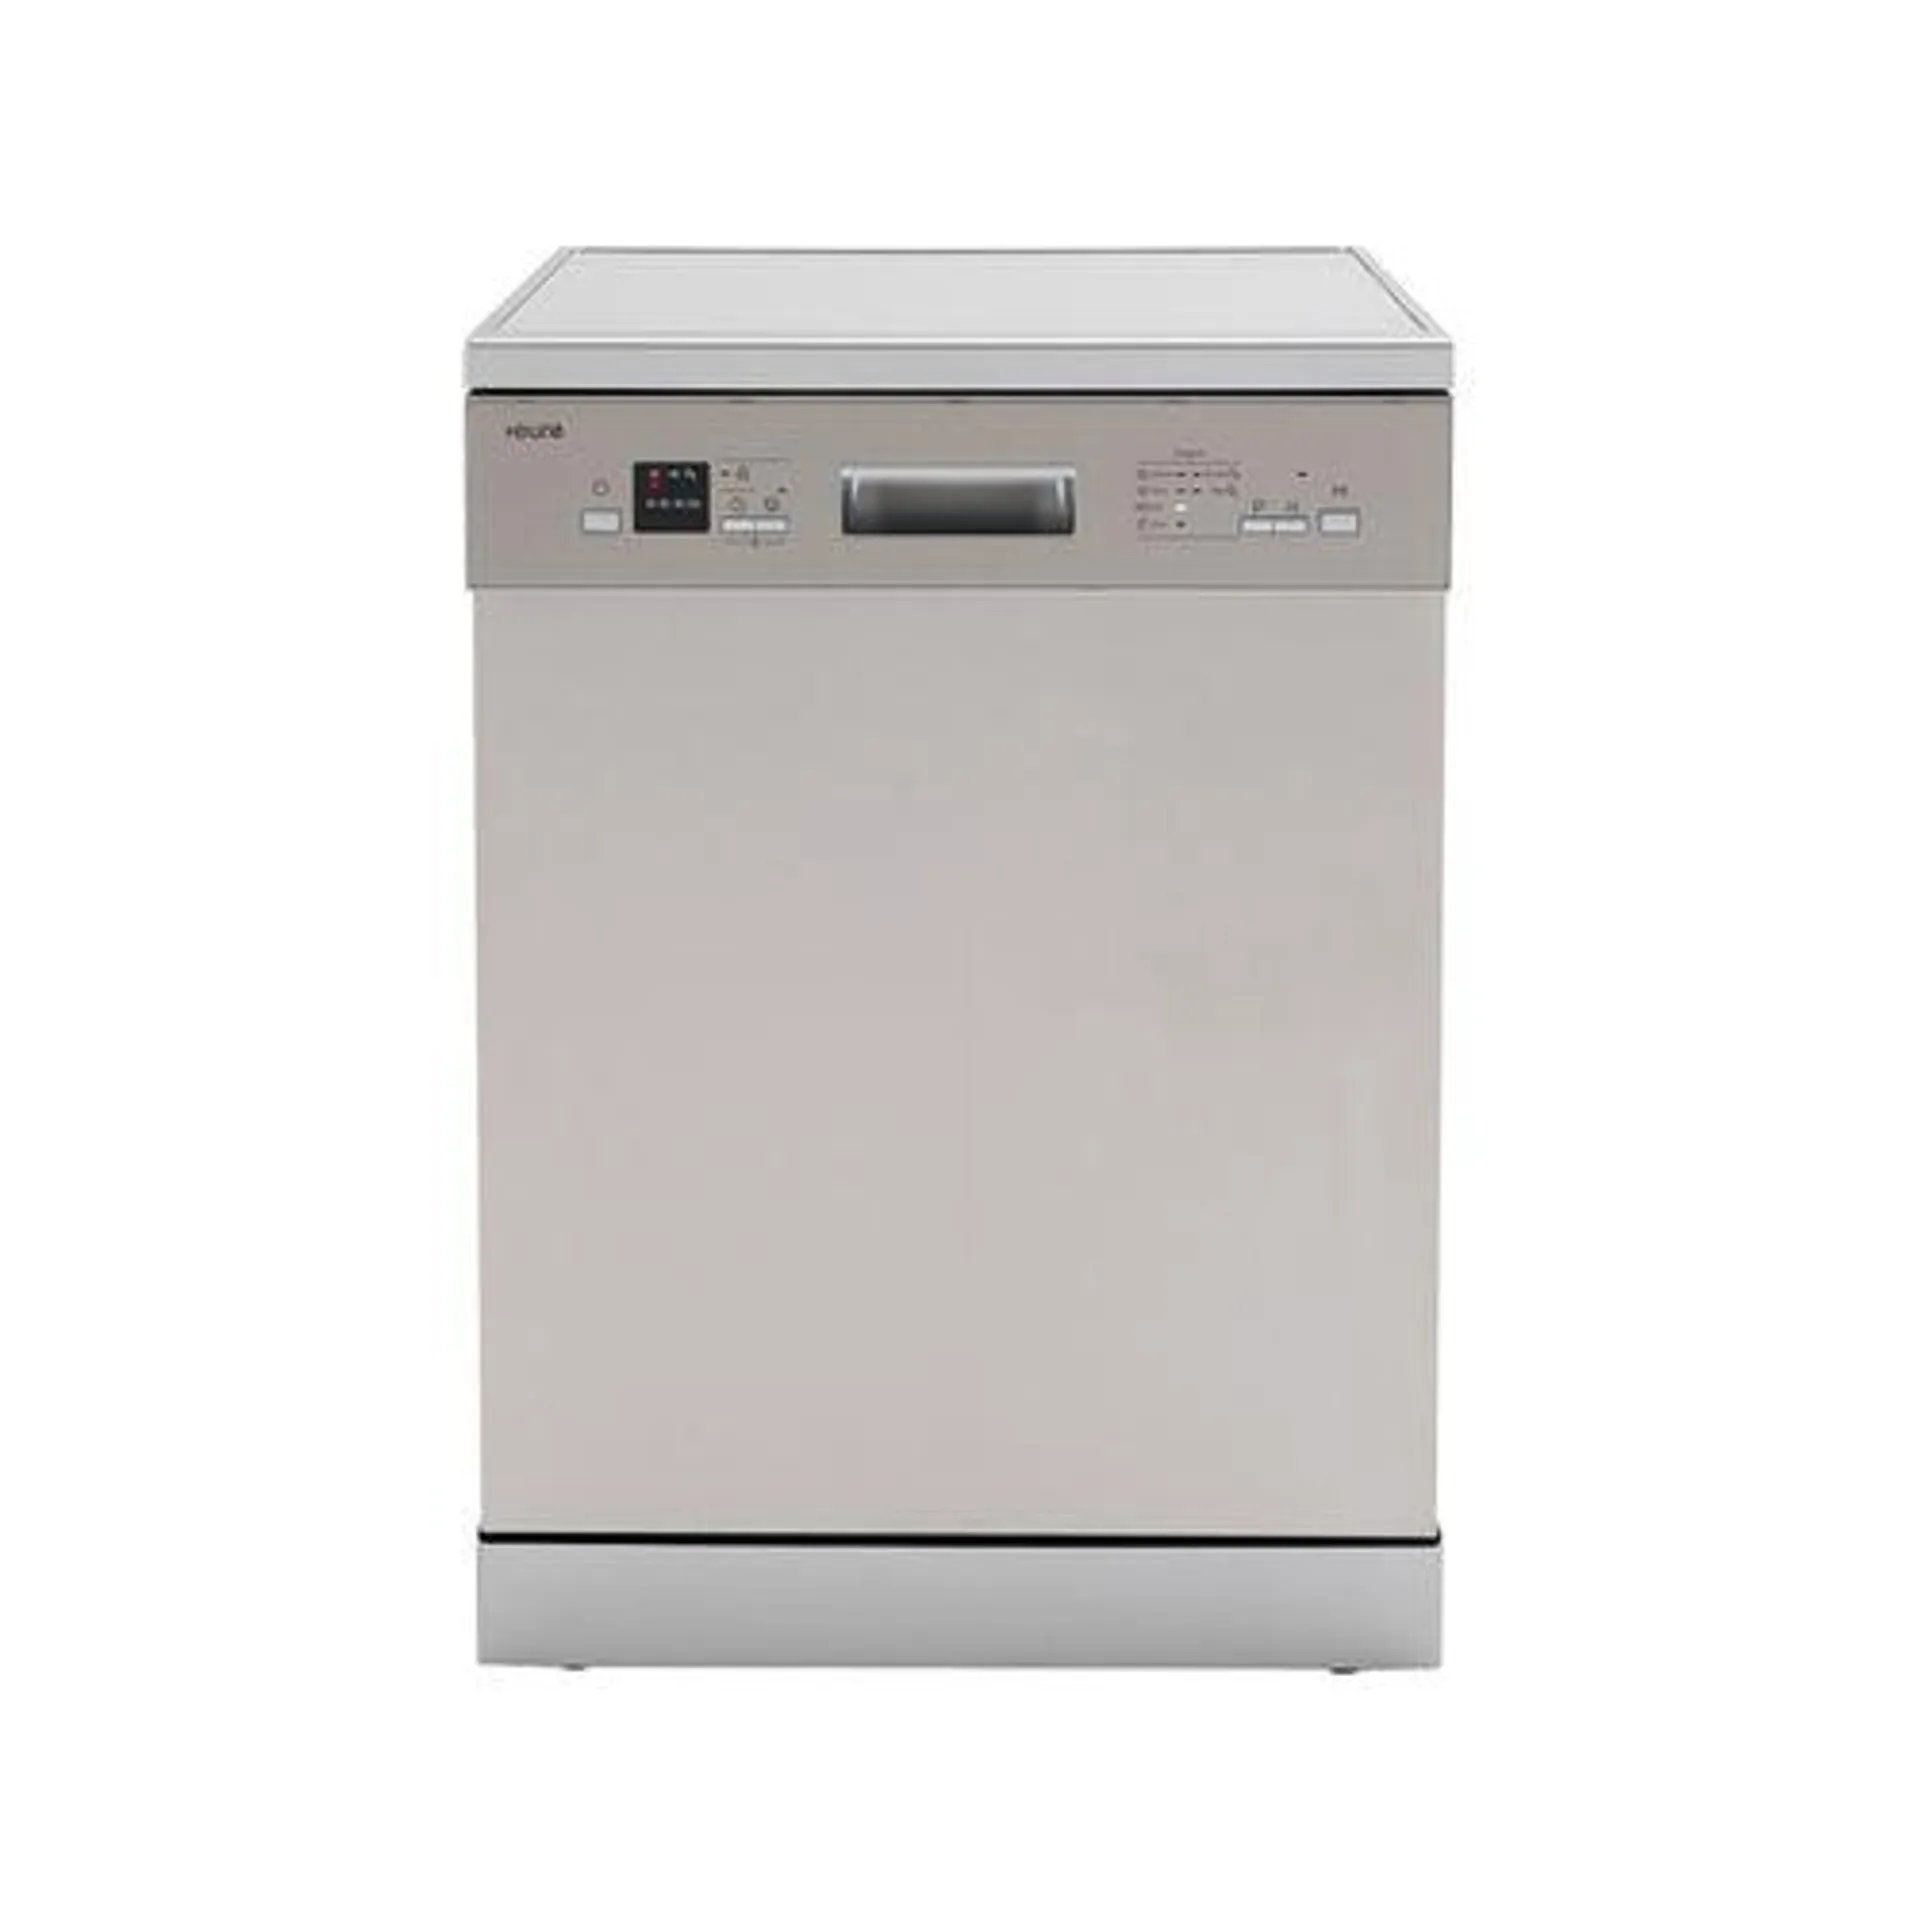 Euro 60cm 14 Place Dishwasher - Trade Only WELS 4.5 Star 12.5L/W